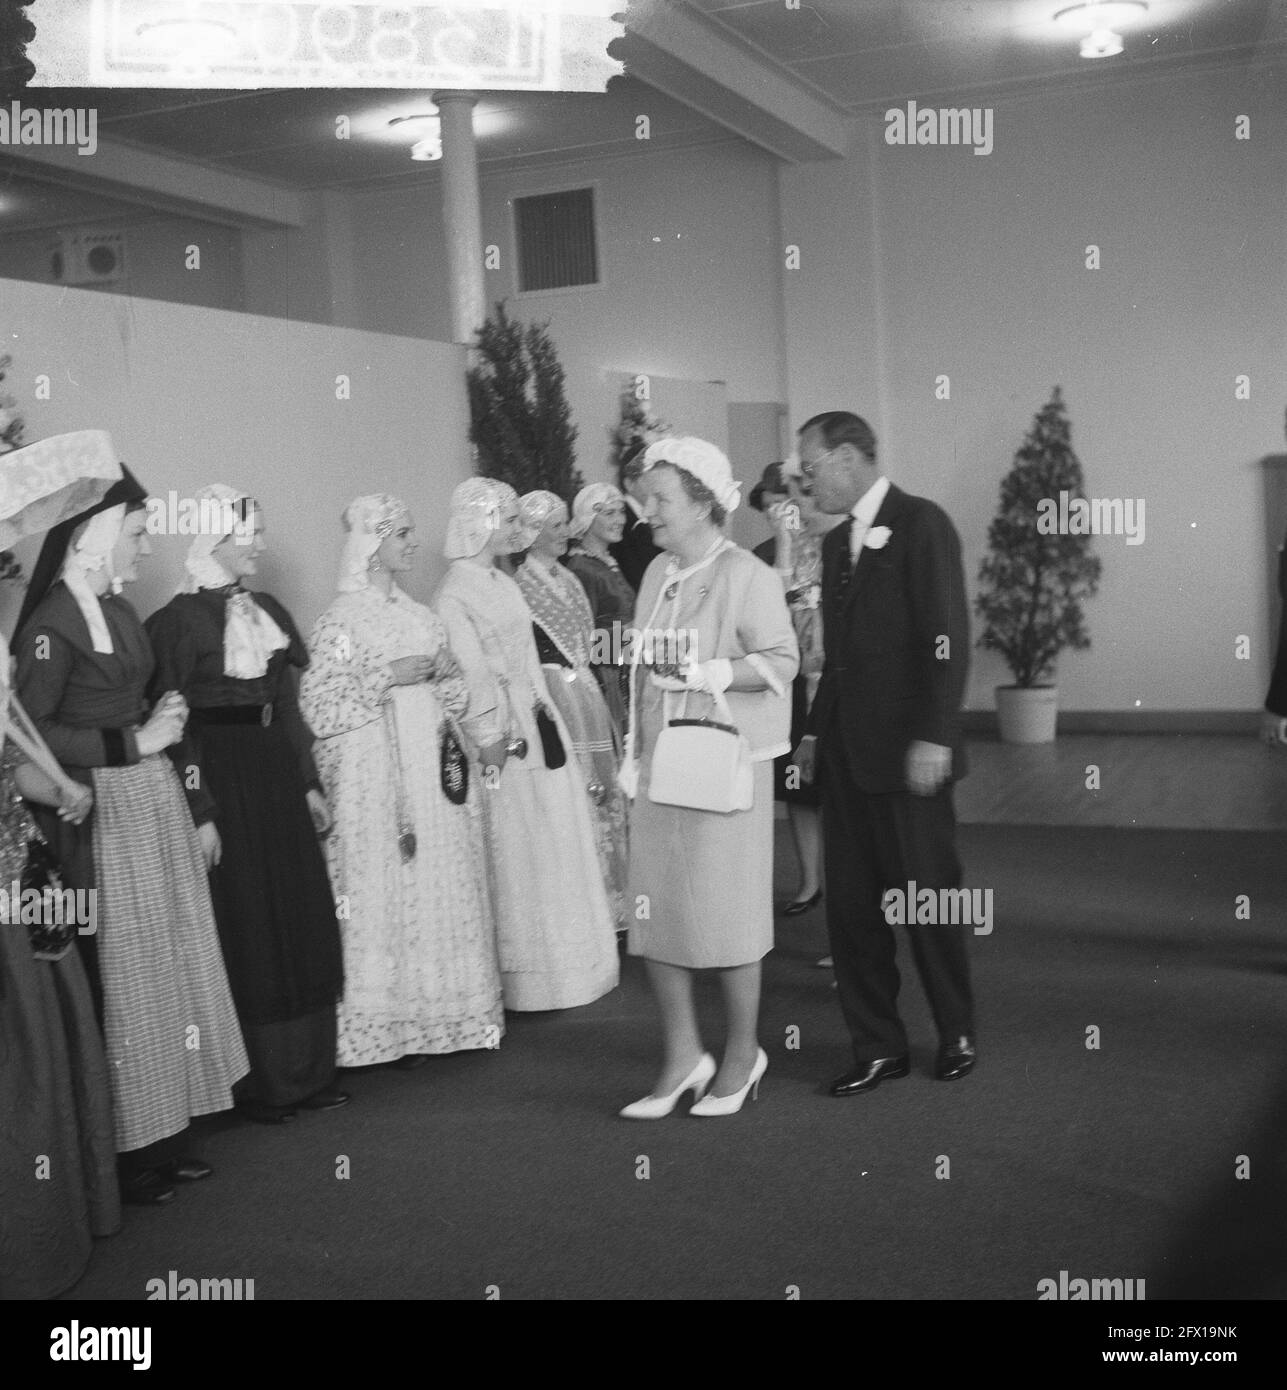 Royal visit to Groningen and Friesland (reportage), 7 May 1962, Reports, visits, The Netherlands, 20th century press agency photo, news to remember, documentary, historic photography 1945-1990, visual stories, human history of the Twentieth Century, capturing moments in time Stock Photo